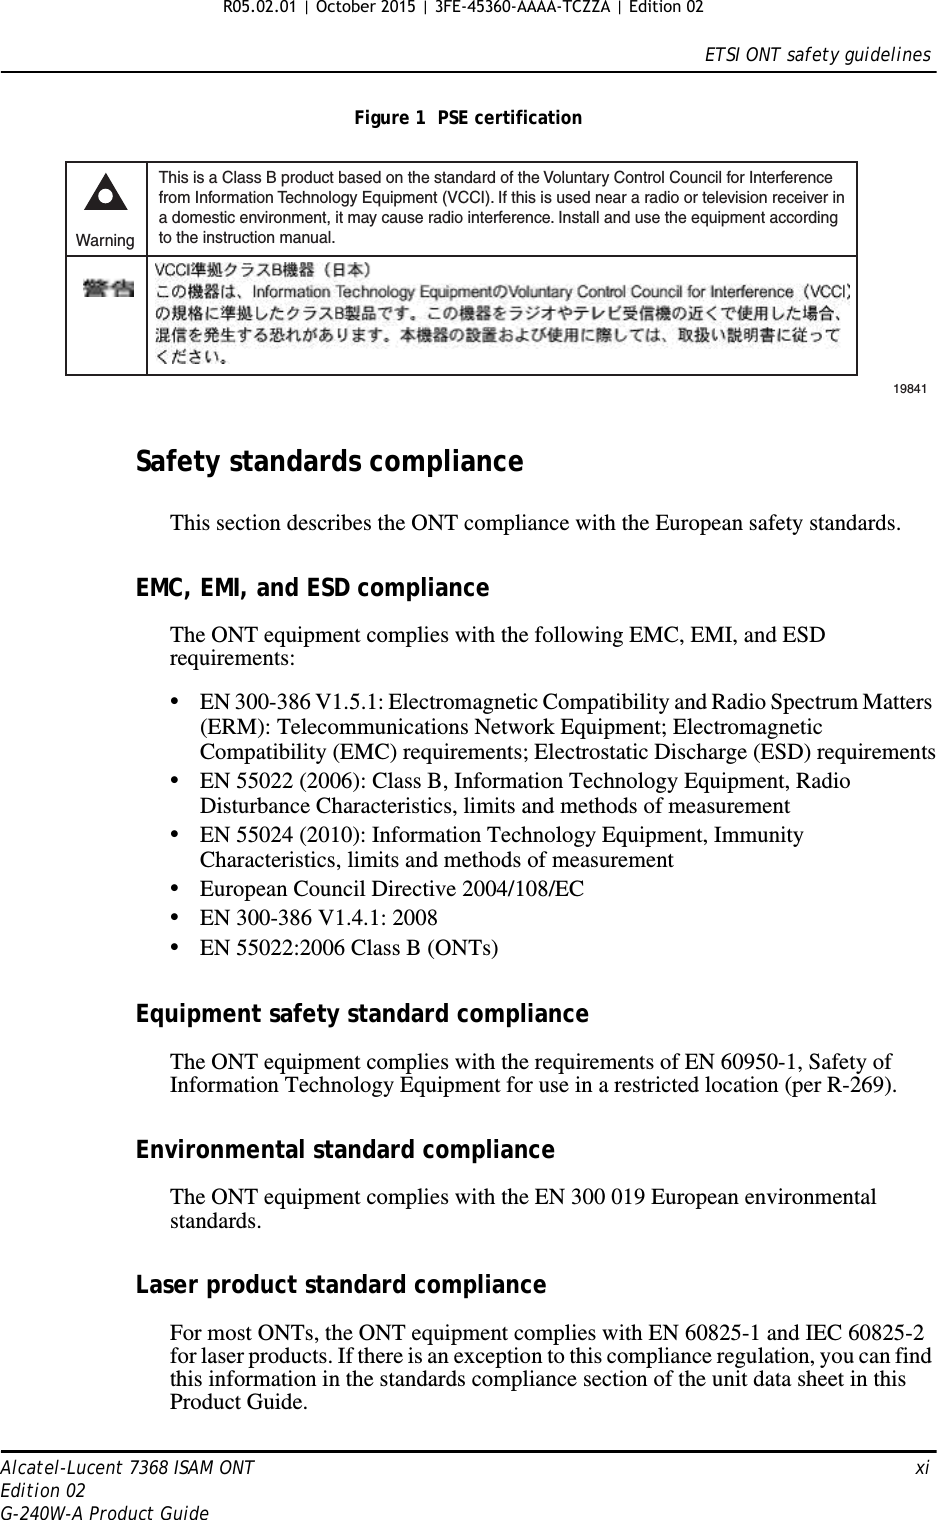 ETSI ONT safety guidelinesAlcatel-Lucent 7368 ISAM ONT   xiEdition 02G-240W-A Product GuideFigure 1  PSE certificationSafety standards complianceThis section describes the ONT compliance with the European safety standards.EMC, EMI, and ESD complianceThe ONT equipment complies with the following EMC, EMI, and ESD requirements:•EN 300-386 V1.5.1: Electromagnetic Compatibility and Radio Spectrum Matters (ERM): Telecommunications Network Equipment; Electromagnetic Compatibility (EMC) requirements; Electrostatic Discharge (ESD) requirements•EN 55022 (2006): Class B, Information Technology Equipment, Radio Disturbance Characteristics, limits and methods of measurement•EN 55024 (2010): Information Technology Equipment, Immunity Characteristics, limits and methods of measurement•European Council Directive 2004/108/EC•EN 300-386 V1.4.1: 2008•EN 55022:2006 Class B (ONTs)Equipment safety standard complianceThe ONT equipment complies with the requirements of EN 60950-1, Safety of Information Technology Equipment for use in a restricted location (per R-269).Environmental standard complianceThe ONT equipment complies with the EN 300 019 European environmental standards.Laser product standard complianceFor most ONTs, the ONT equipment complies with EN 60825-1 and IEC 60825-2 for laser products. If there is an exception to this compliance regulation, you can find this information in the standards compliance section of the unit data sheet in this Product Guide.This is a Class B product based on the standard of the Voluntary Control Council for Interferencefrom Information Technology Equipment (VCCI). If this is used near a radio or television receiver ina domestic environment, it may cause radio interference. Install and use the equipment accordingto the instruction manual. Warning19841 R05.02.01 | October 2015 | 3FE-45360-AAAA-TCZZA | Edition 02 